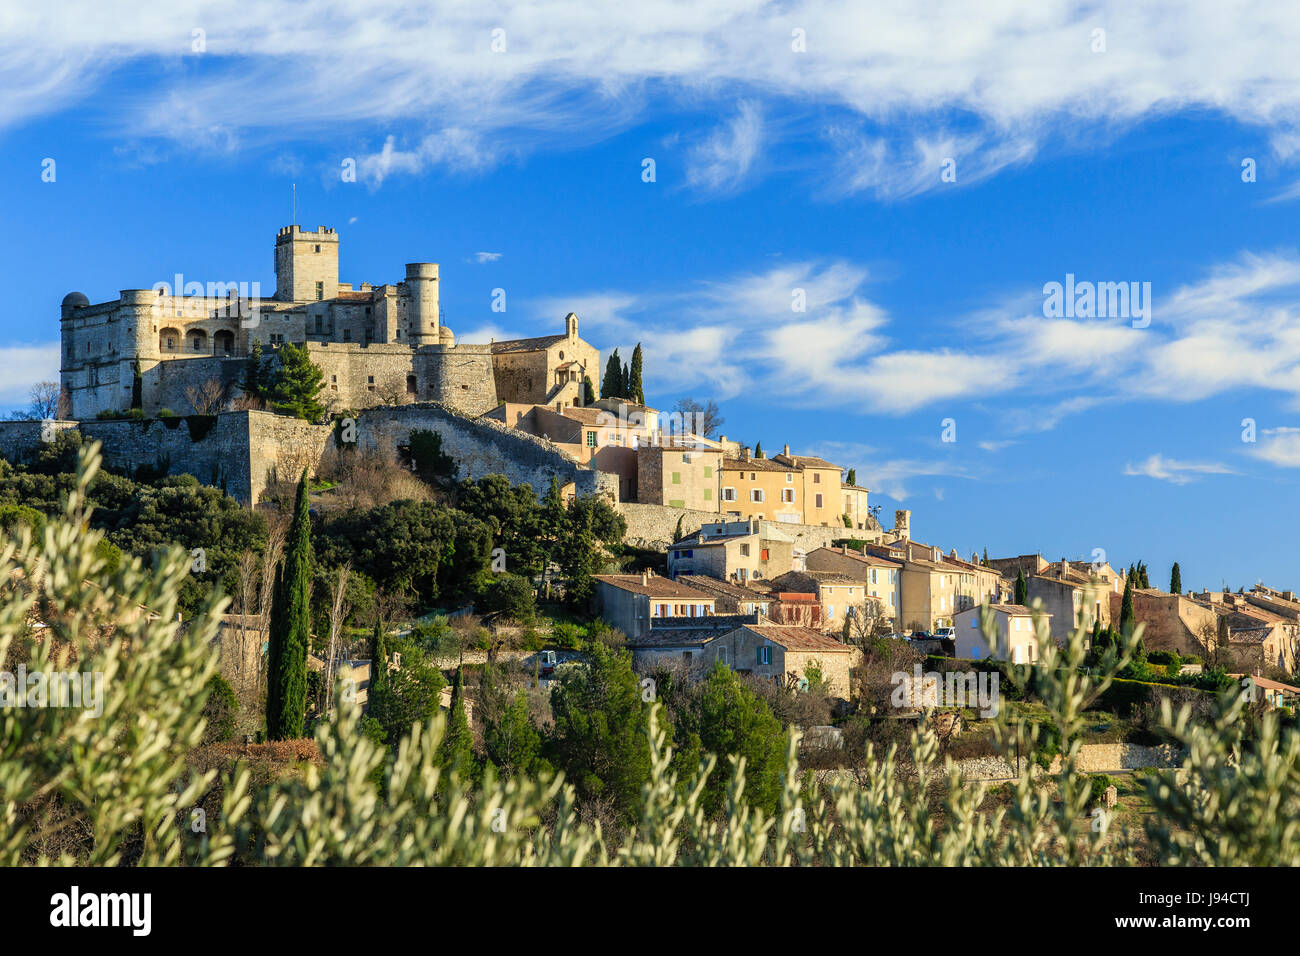 France, Vaucluse, Le Barroux, the village topped with the castle seen from an olive grove Stock Photo